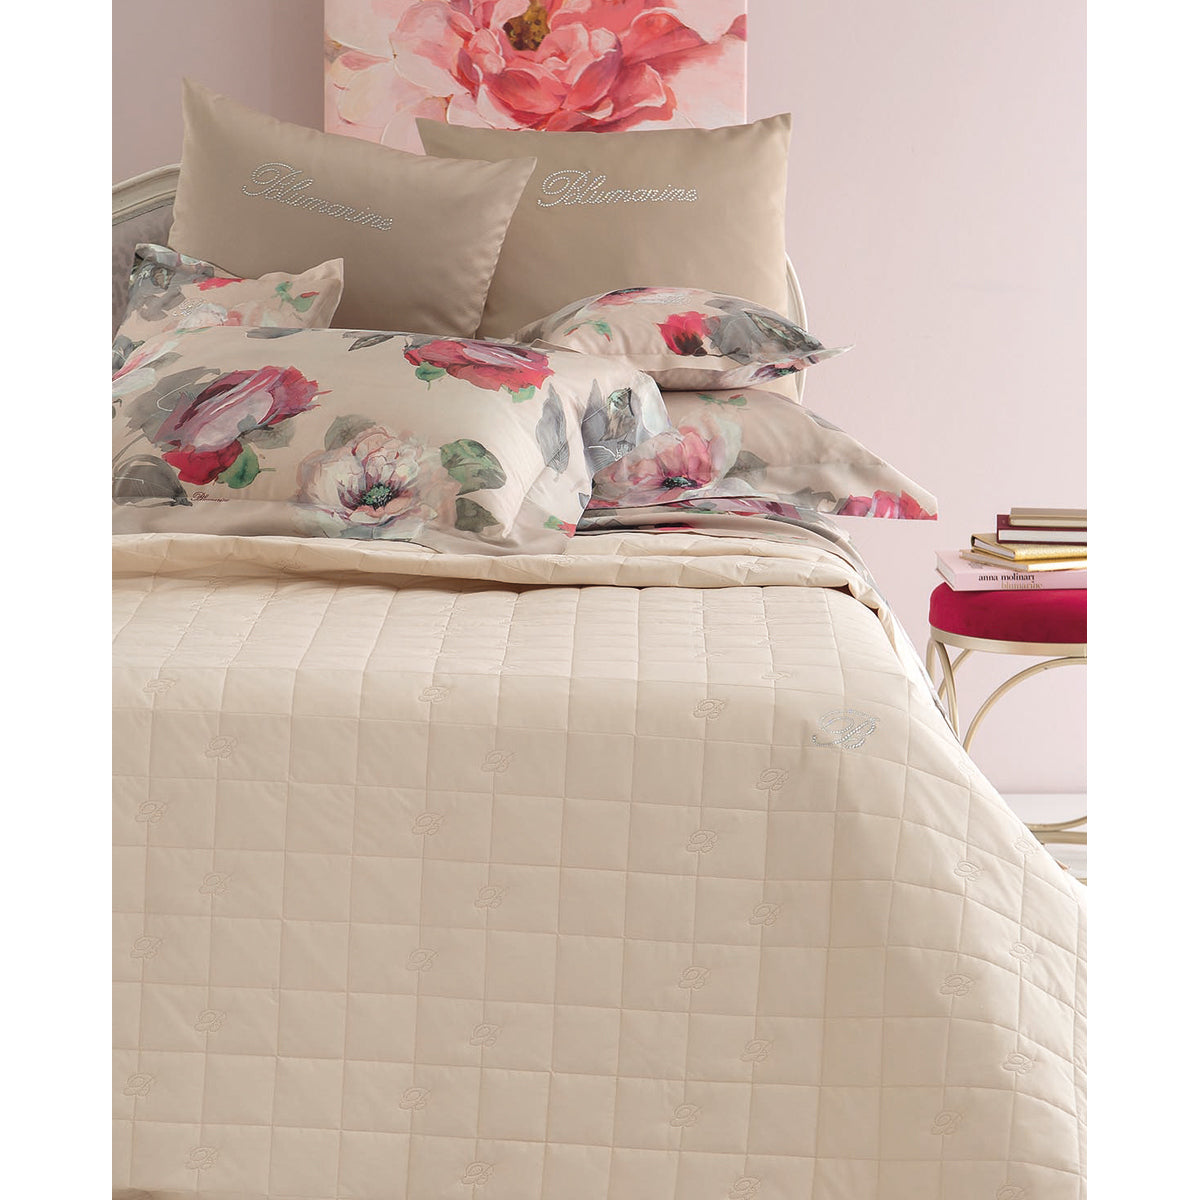 Bedspread for double bed Lory Blumarine